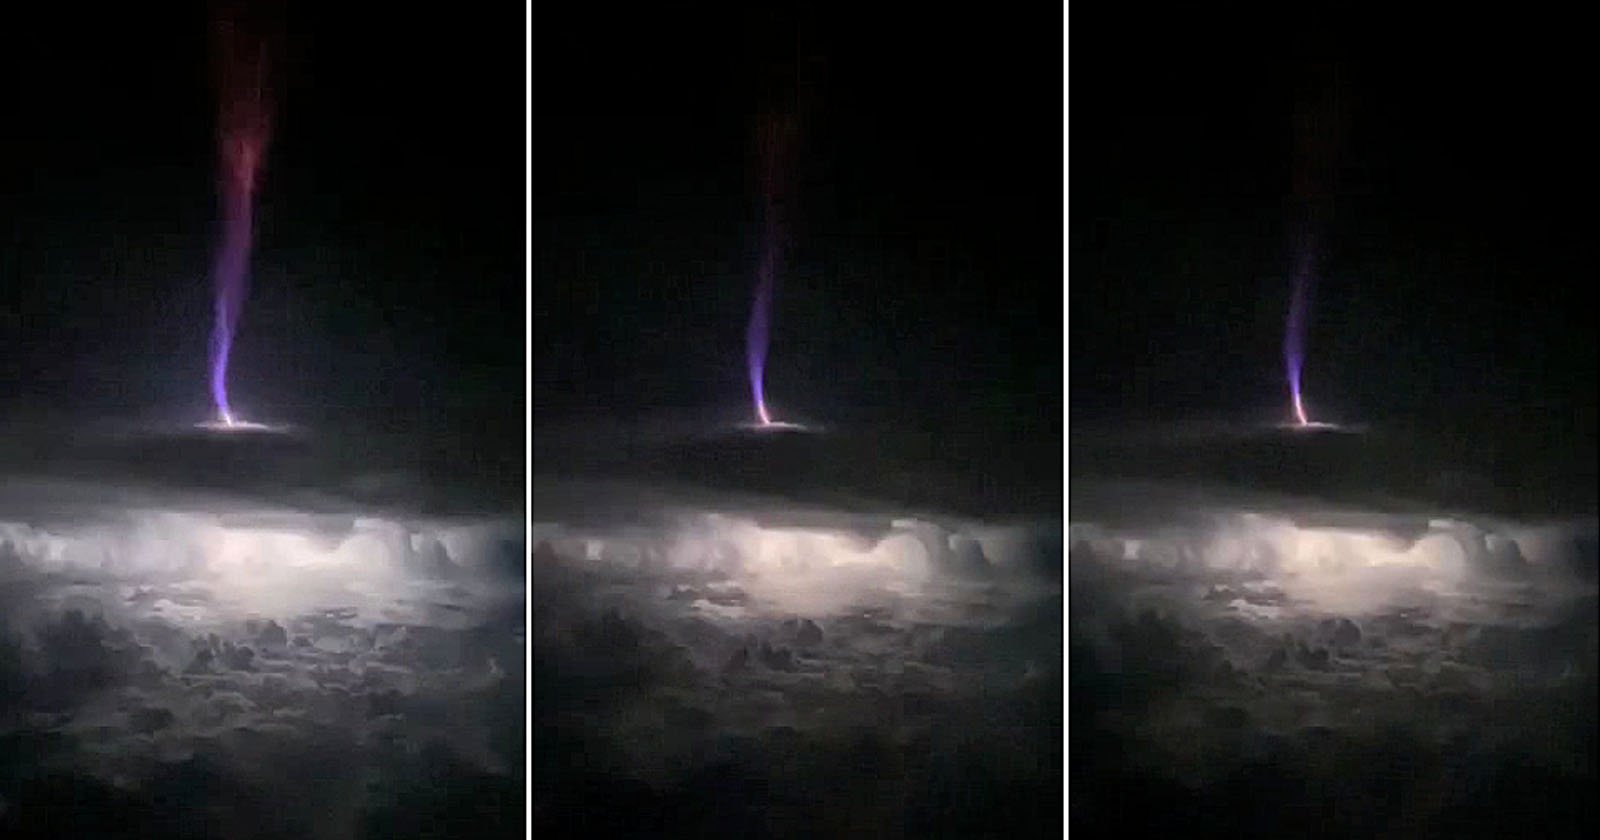 Scientists Reveal New Info on 'Giant Jets' of Lightning in the Atmosphere 